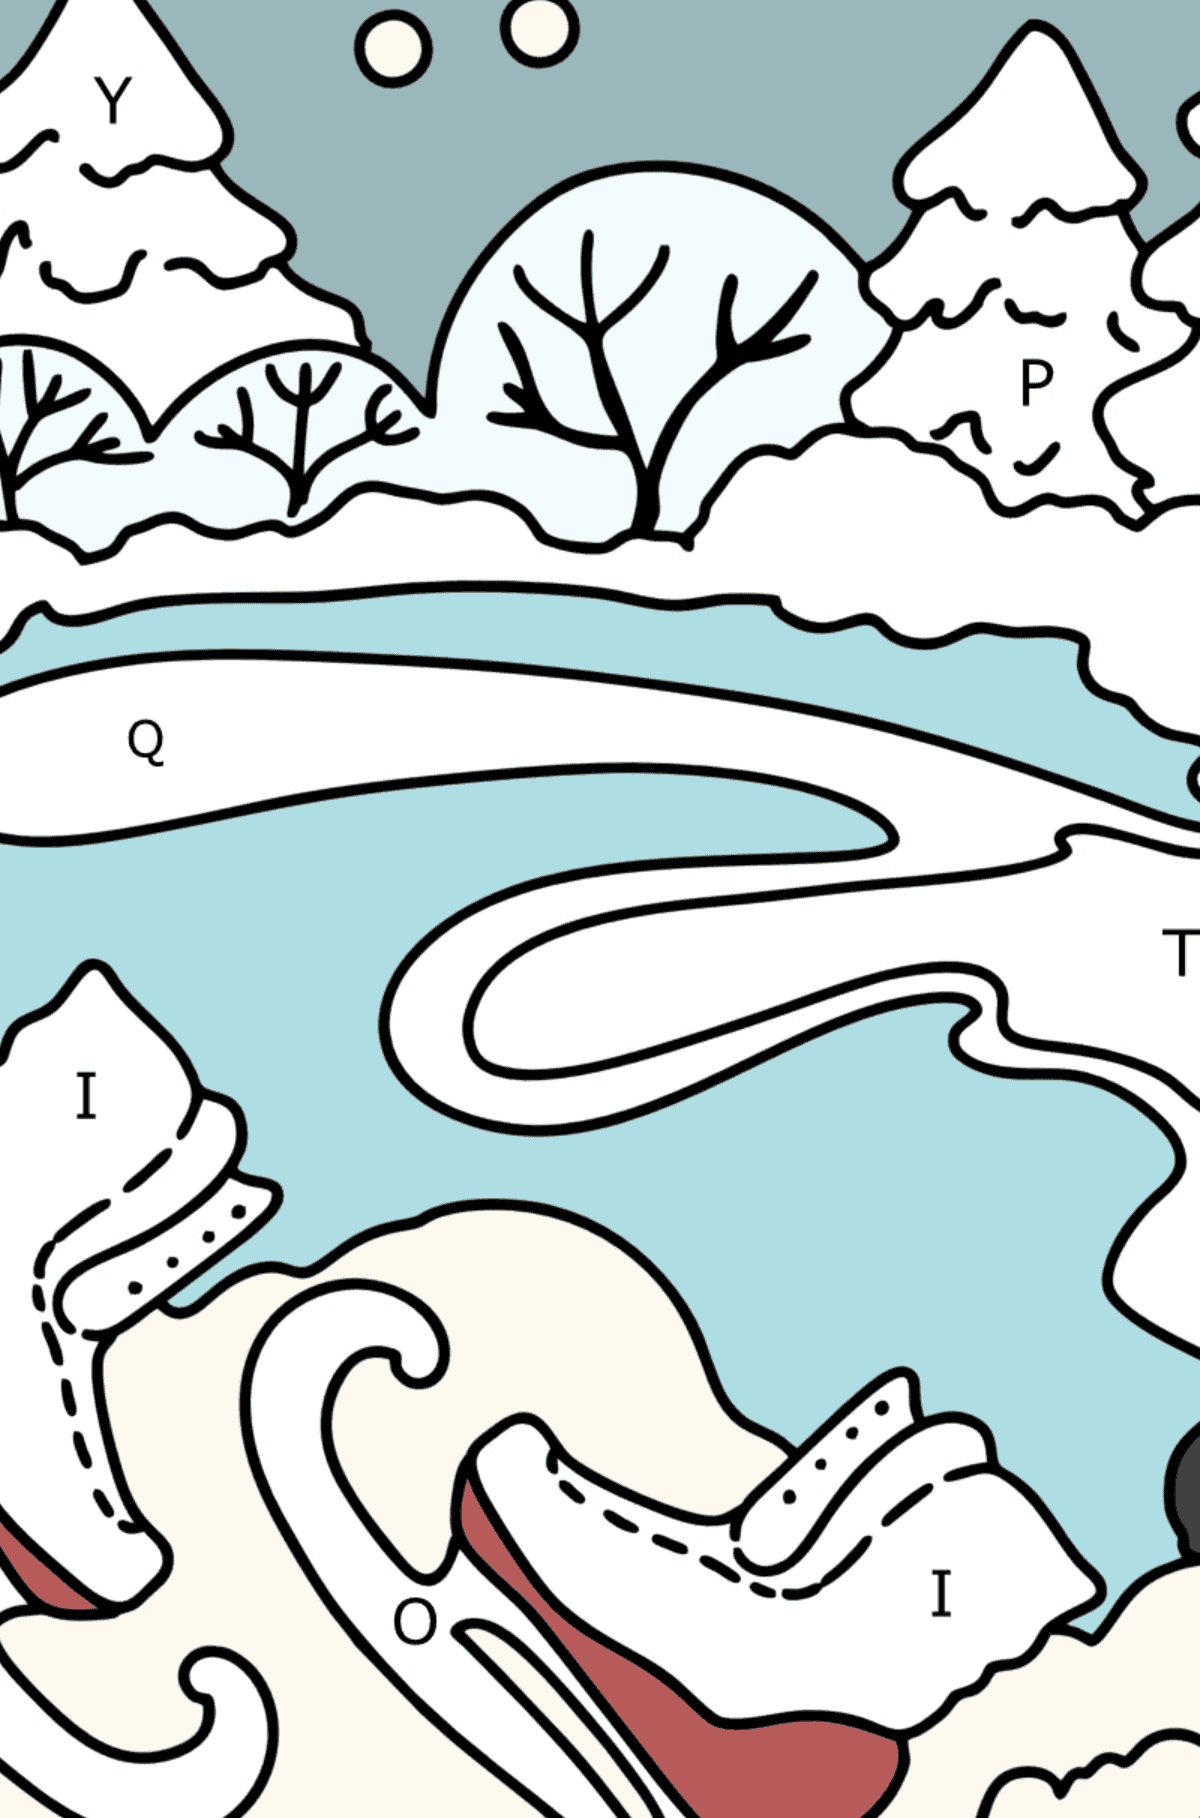 Coloring page - Winter and skates - Coloring by Letters for Kids